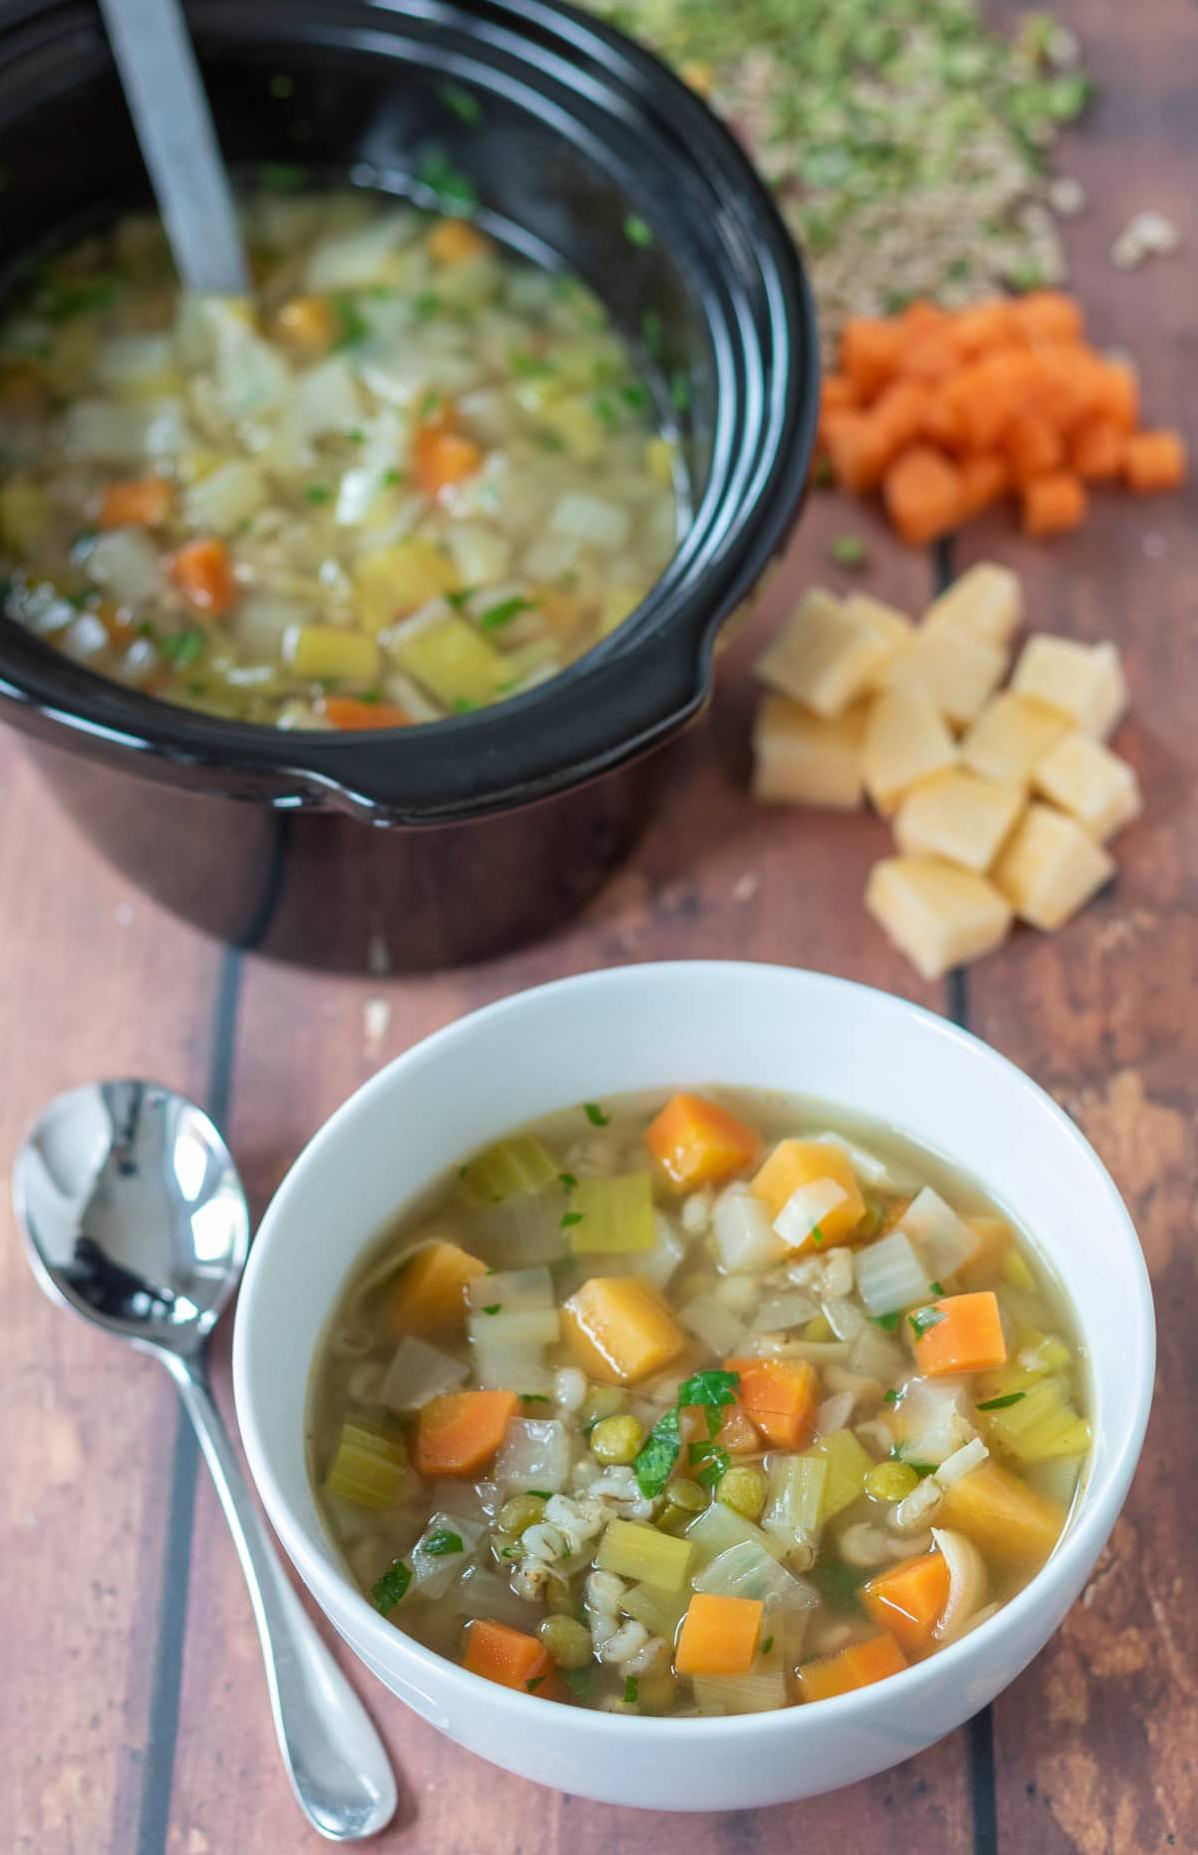  This soup is packed with vegetables and hearty barley, making it a nutritious and filling meal.